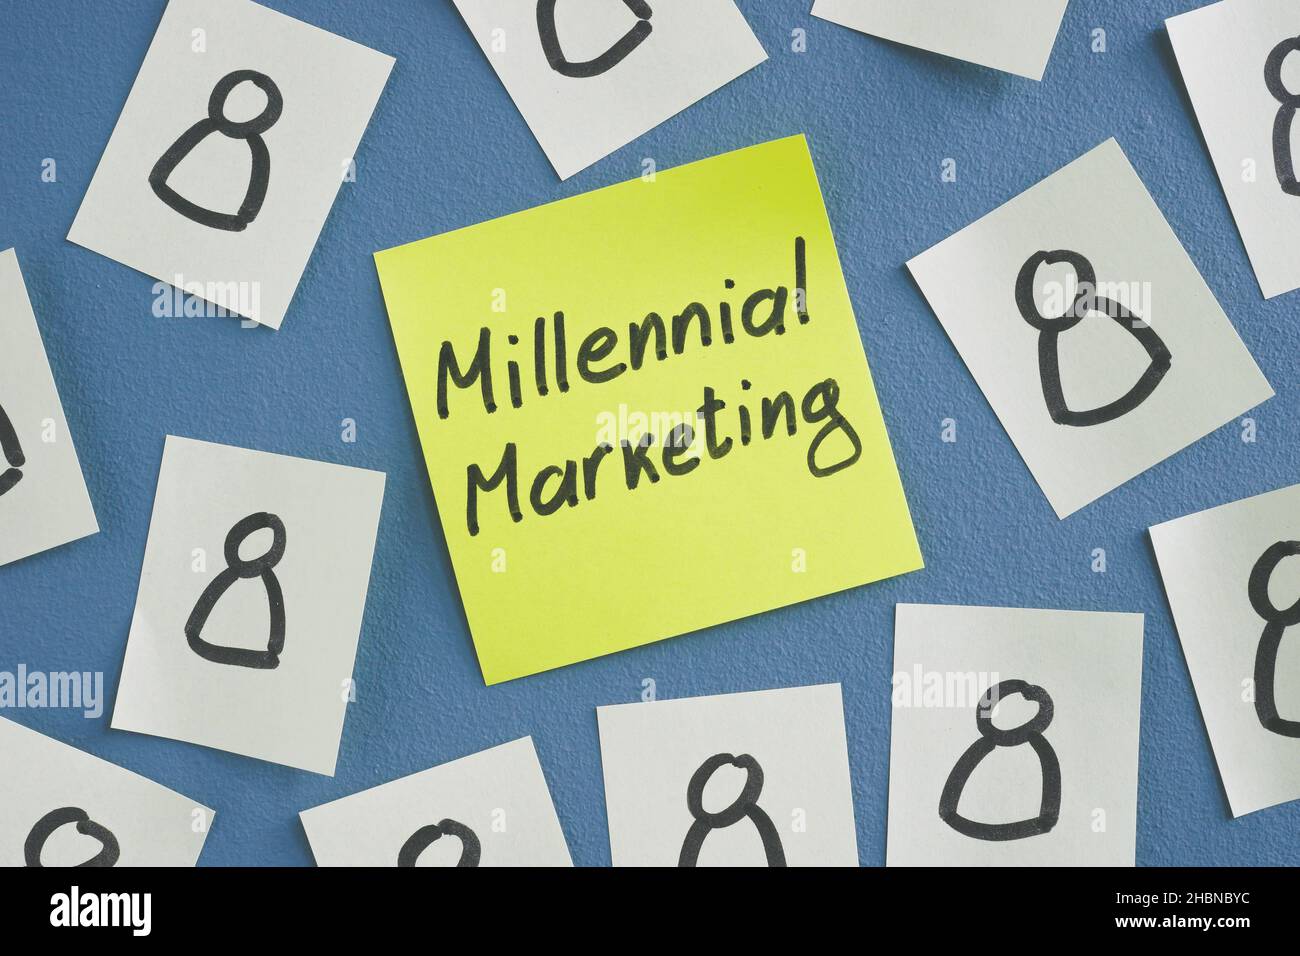 Millennial marketing sign and drawn figures. Stock Photo